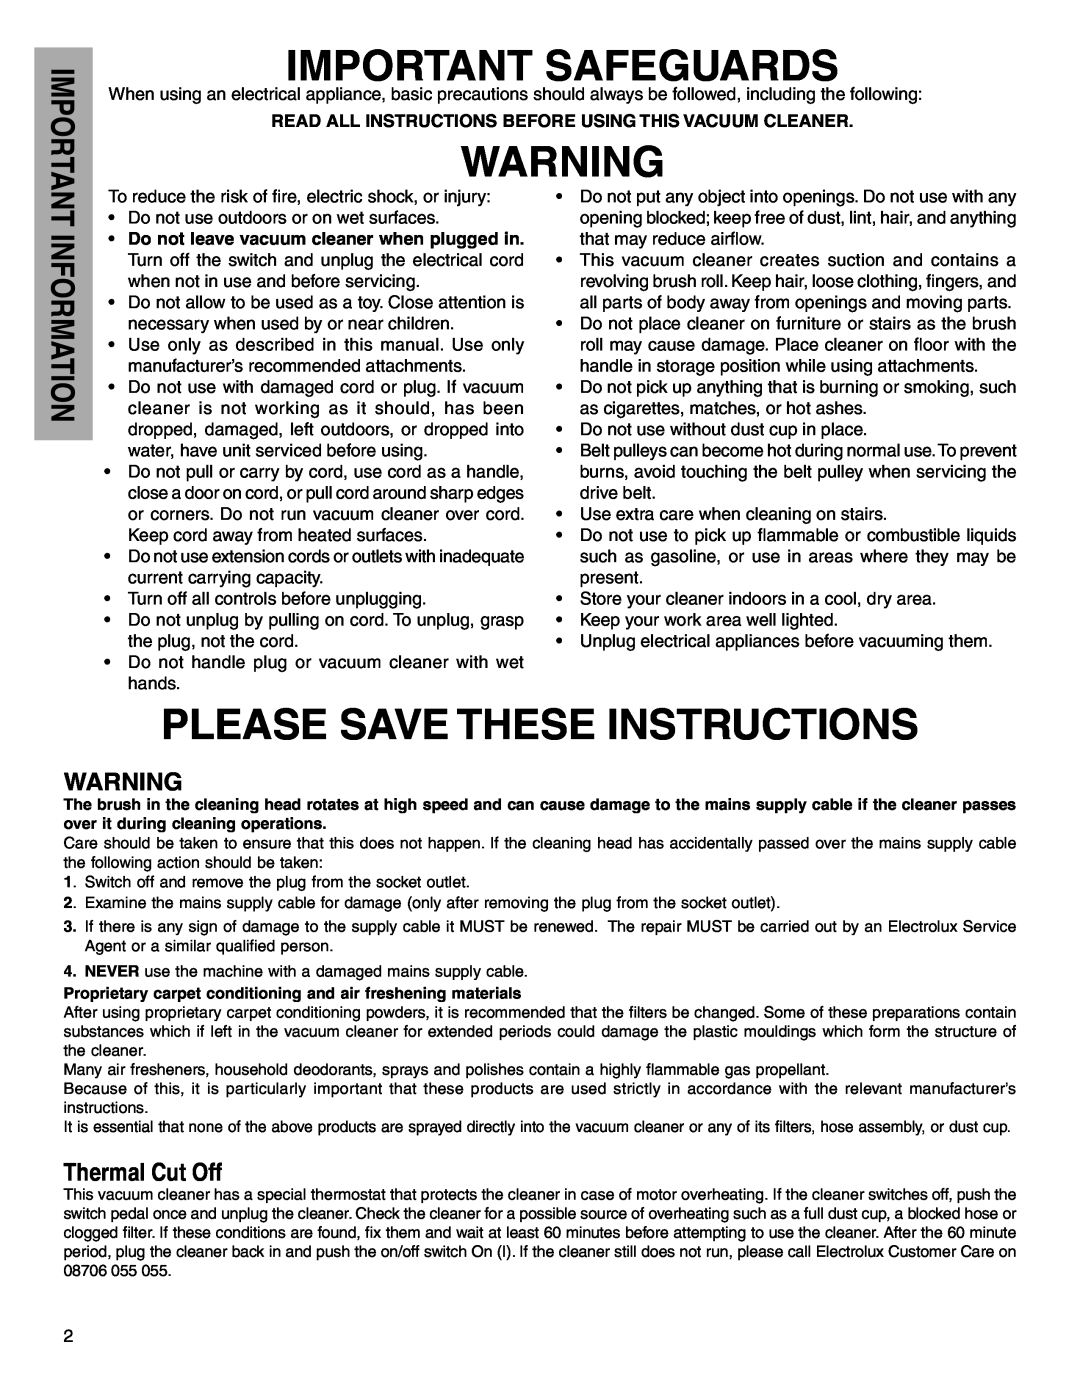 Electrolux Z5600 Series manual Important Safeguards, Please Save These Instructions, Thermal Cut Off 